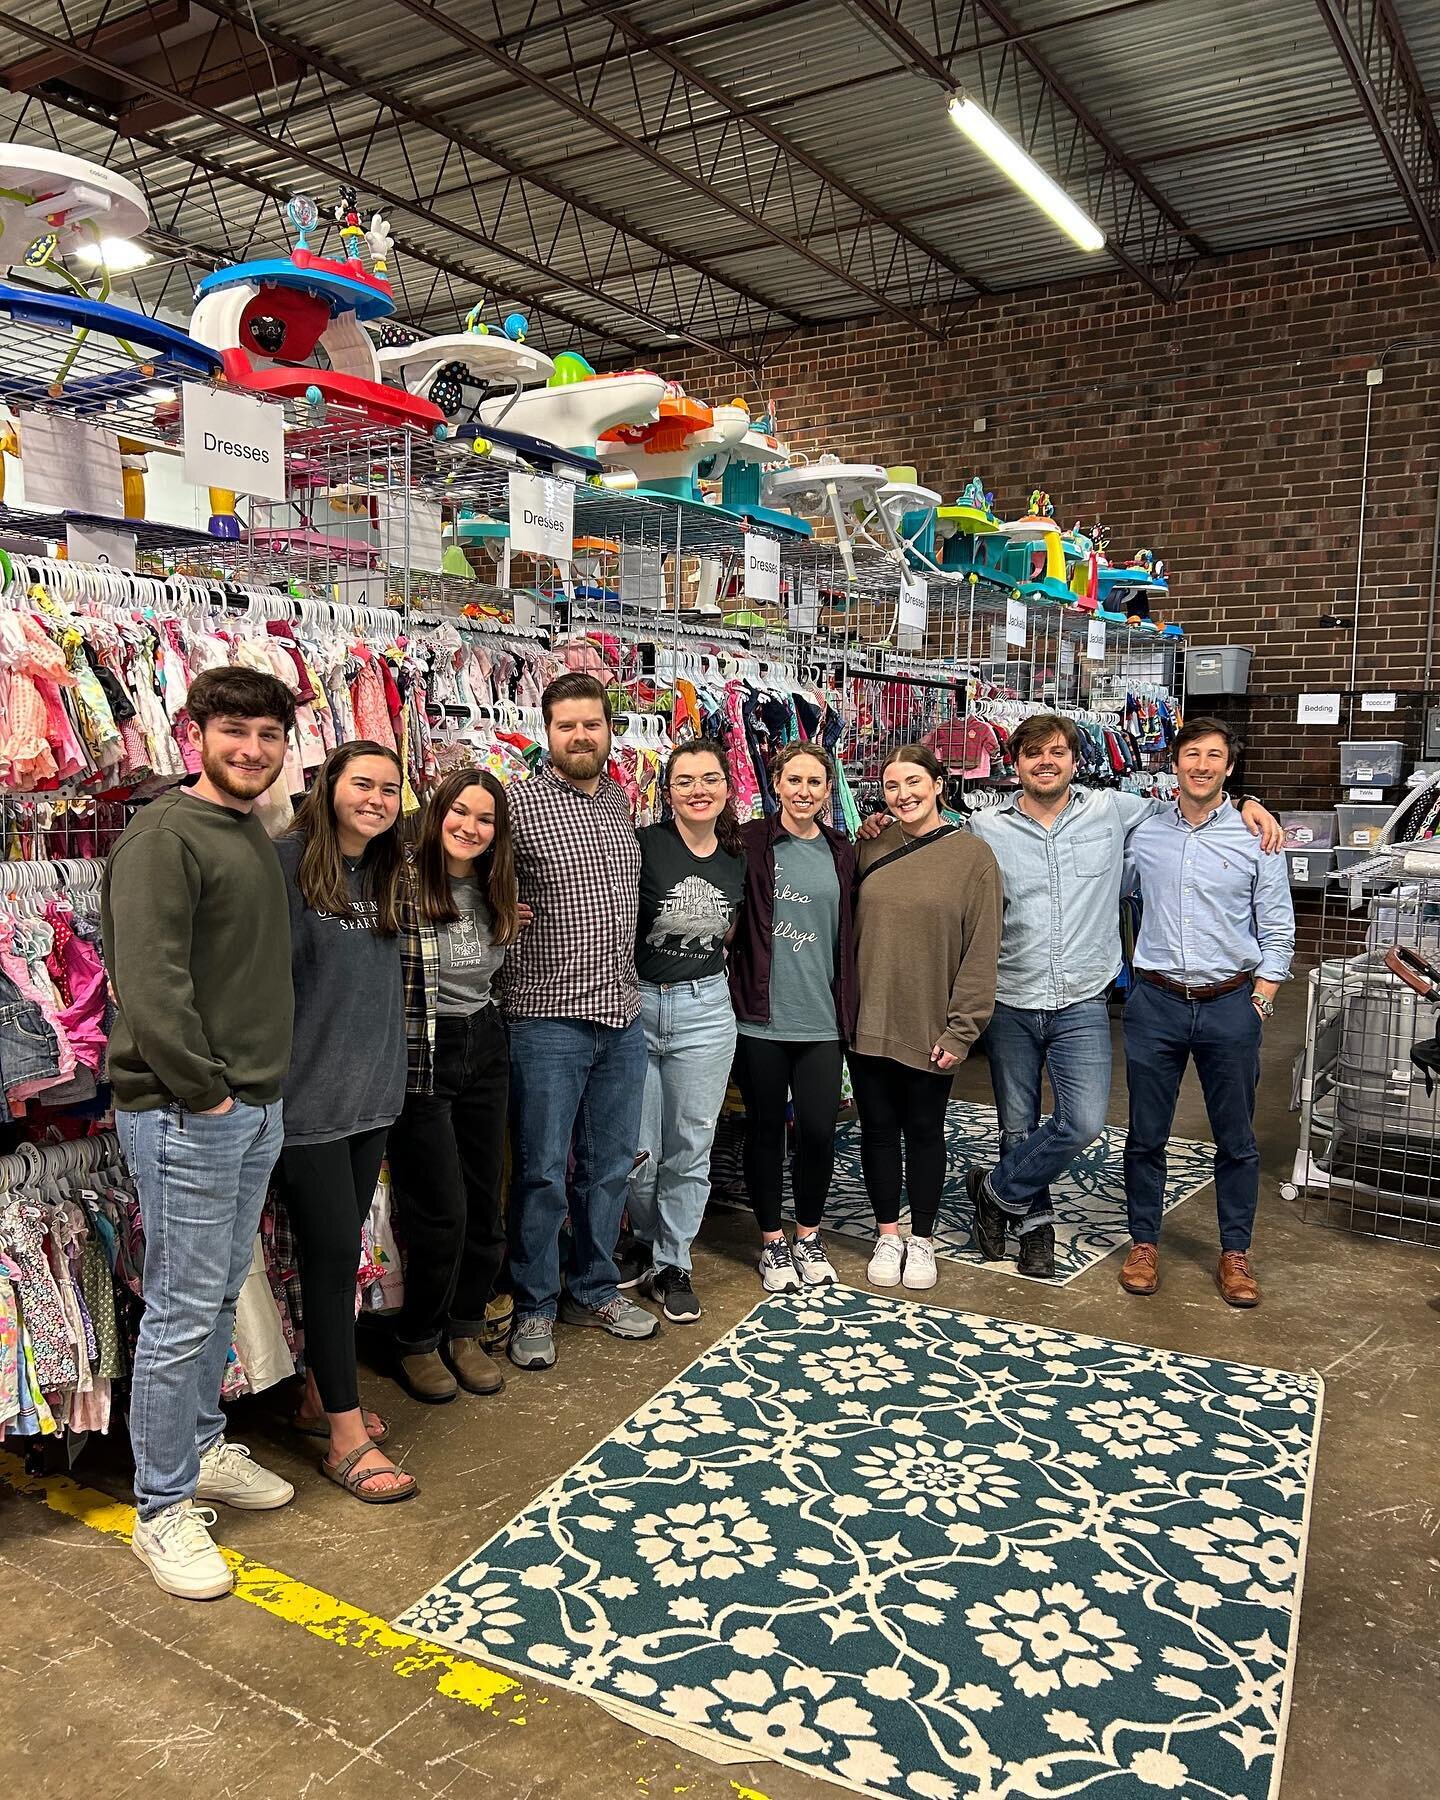 Volunteer highlight: 

Thank you to this amazing community group from Mercy Hill Church for serving with us last week! We are so thankful for their hard work helping us get the resource center ready for placements!